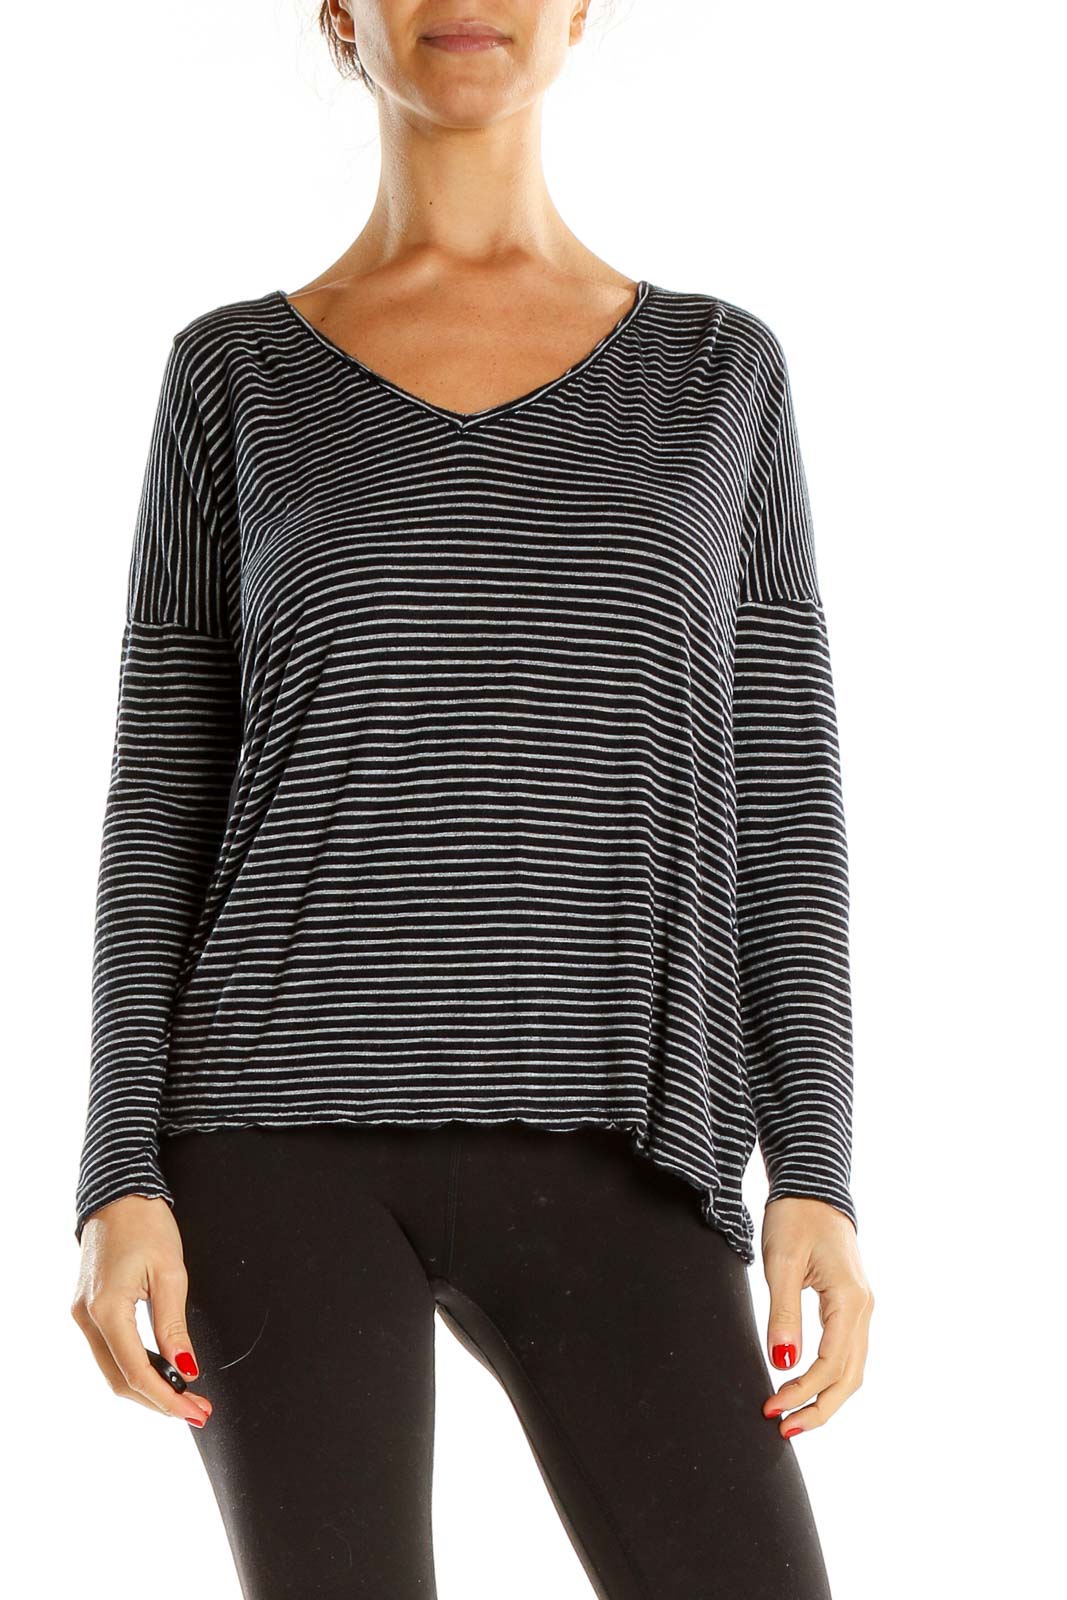 Black Striped Casual Top Front